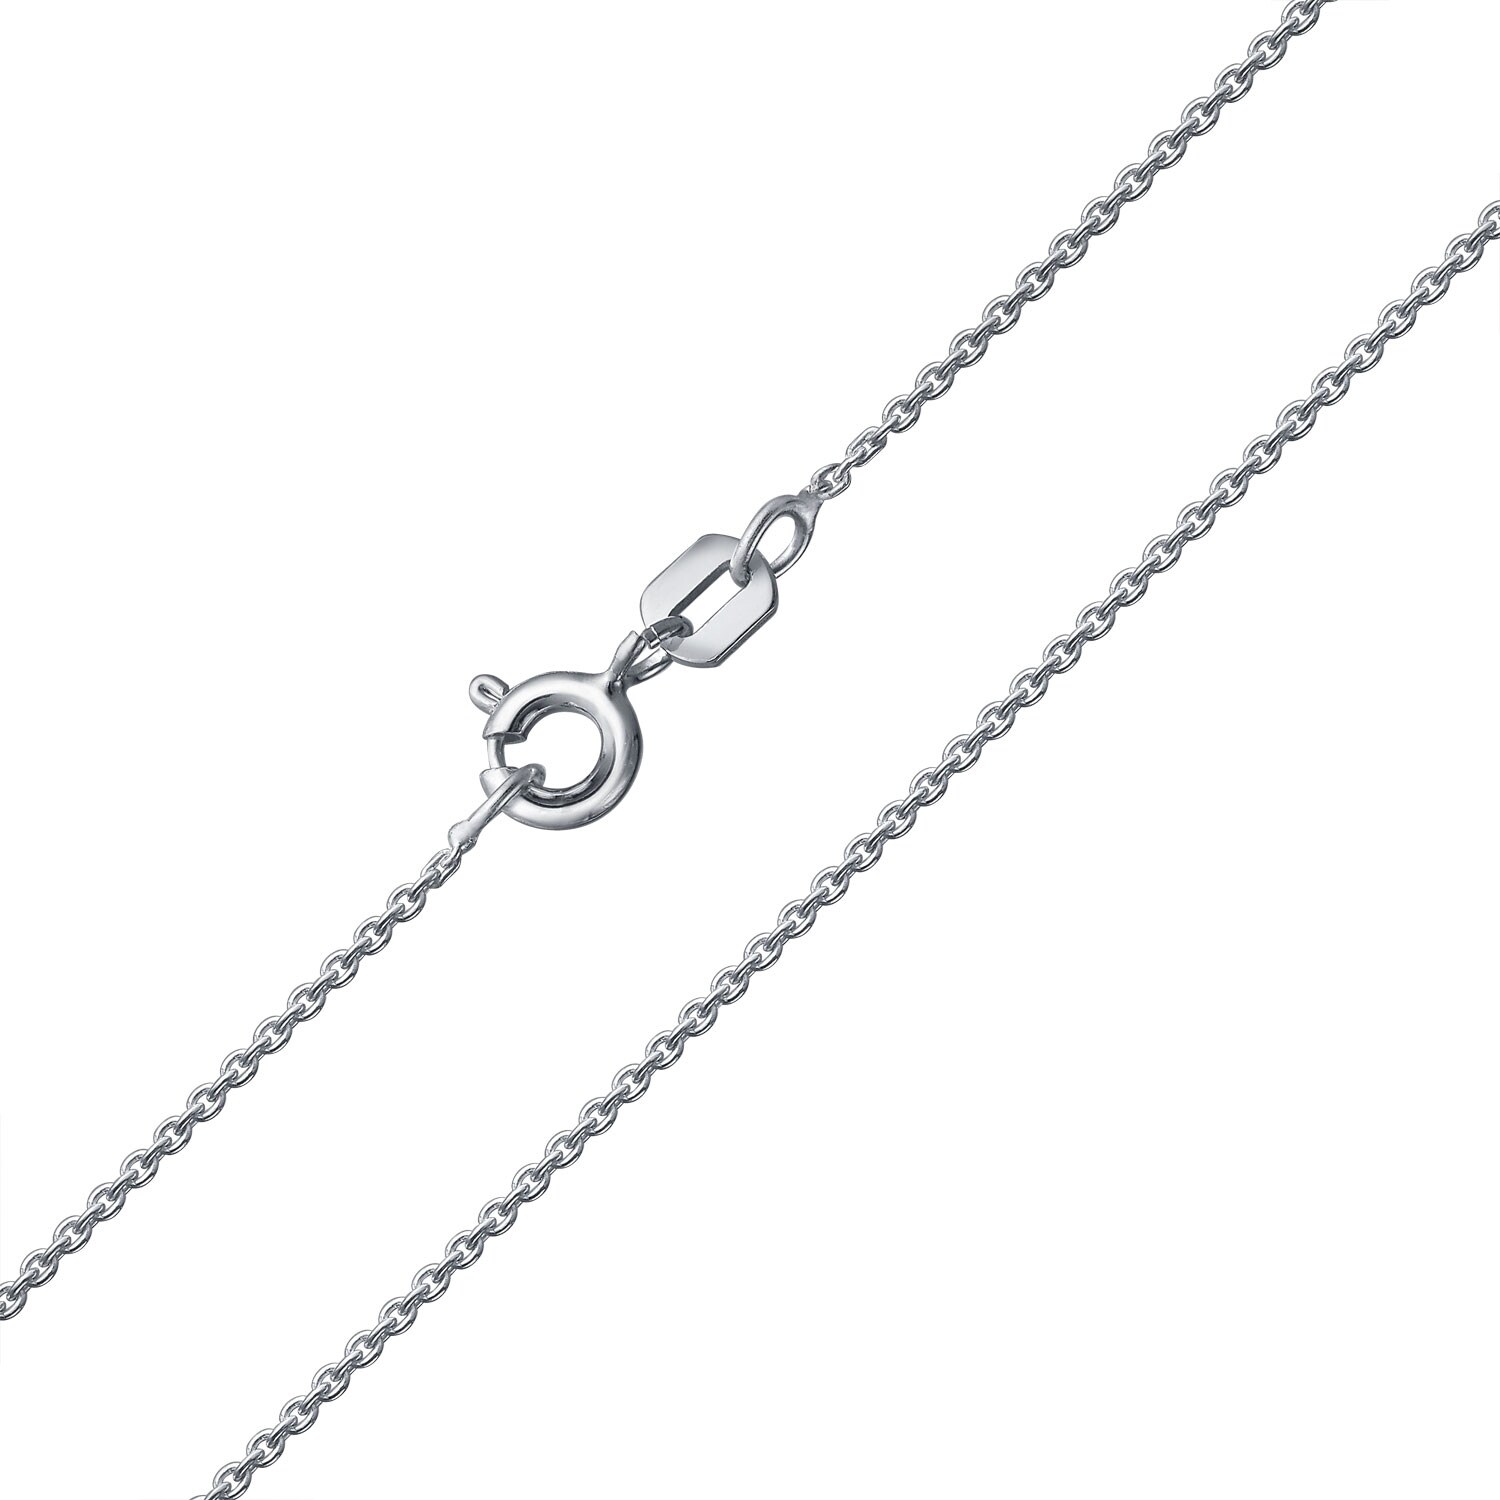 5 X 24" 1mm 925 Silver Round Link Trace Chain Ladies Women's Necklace